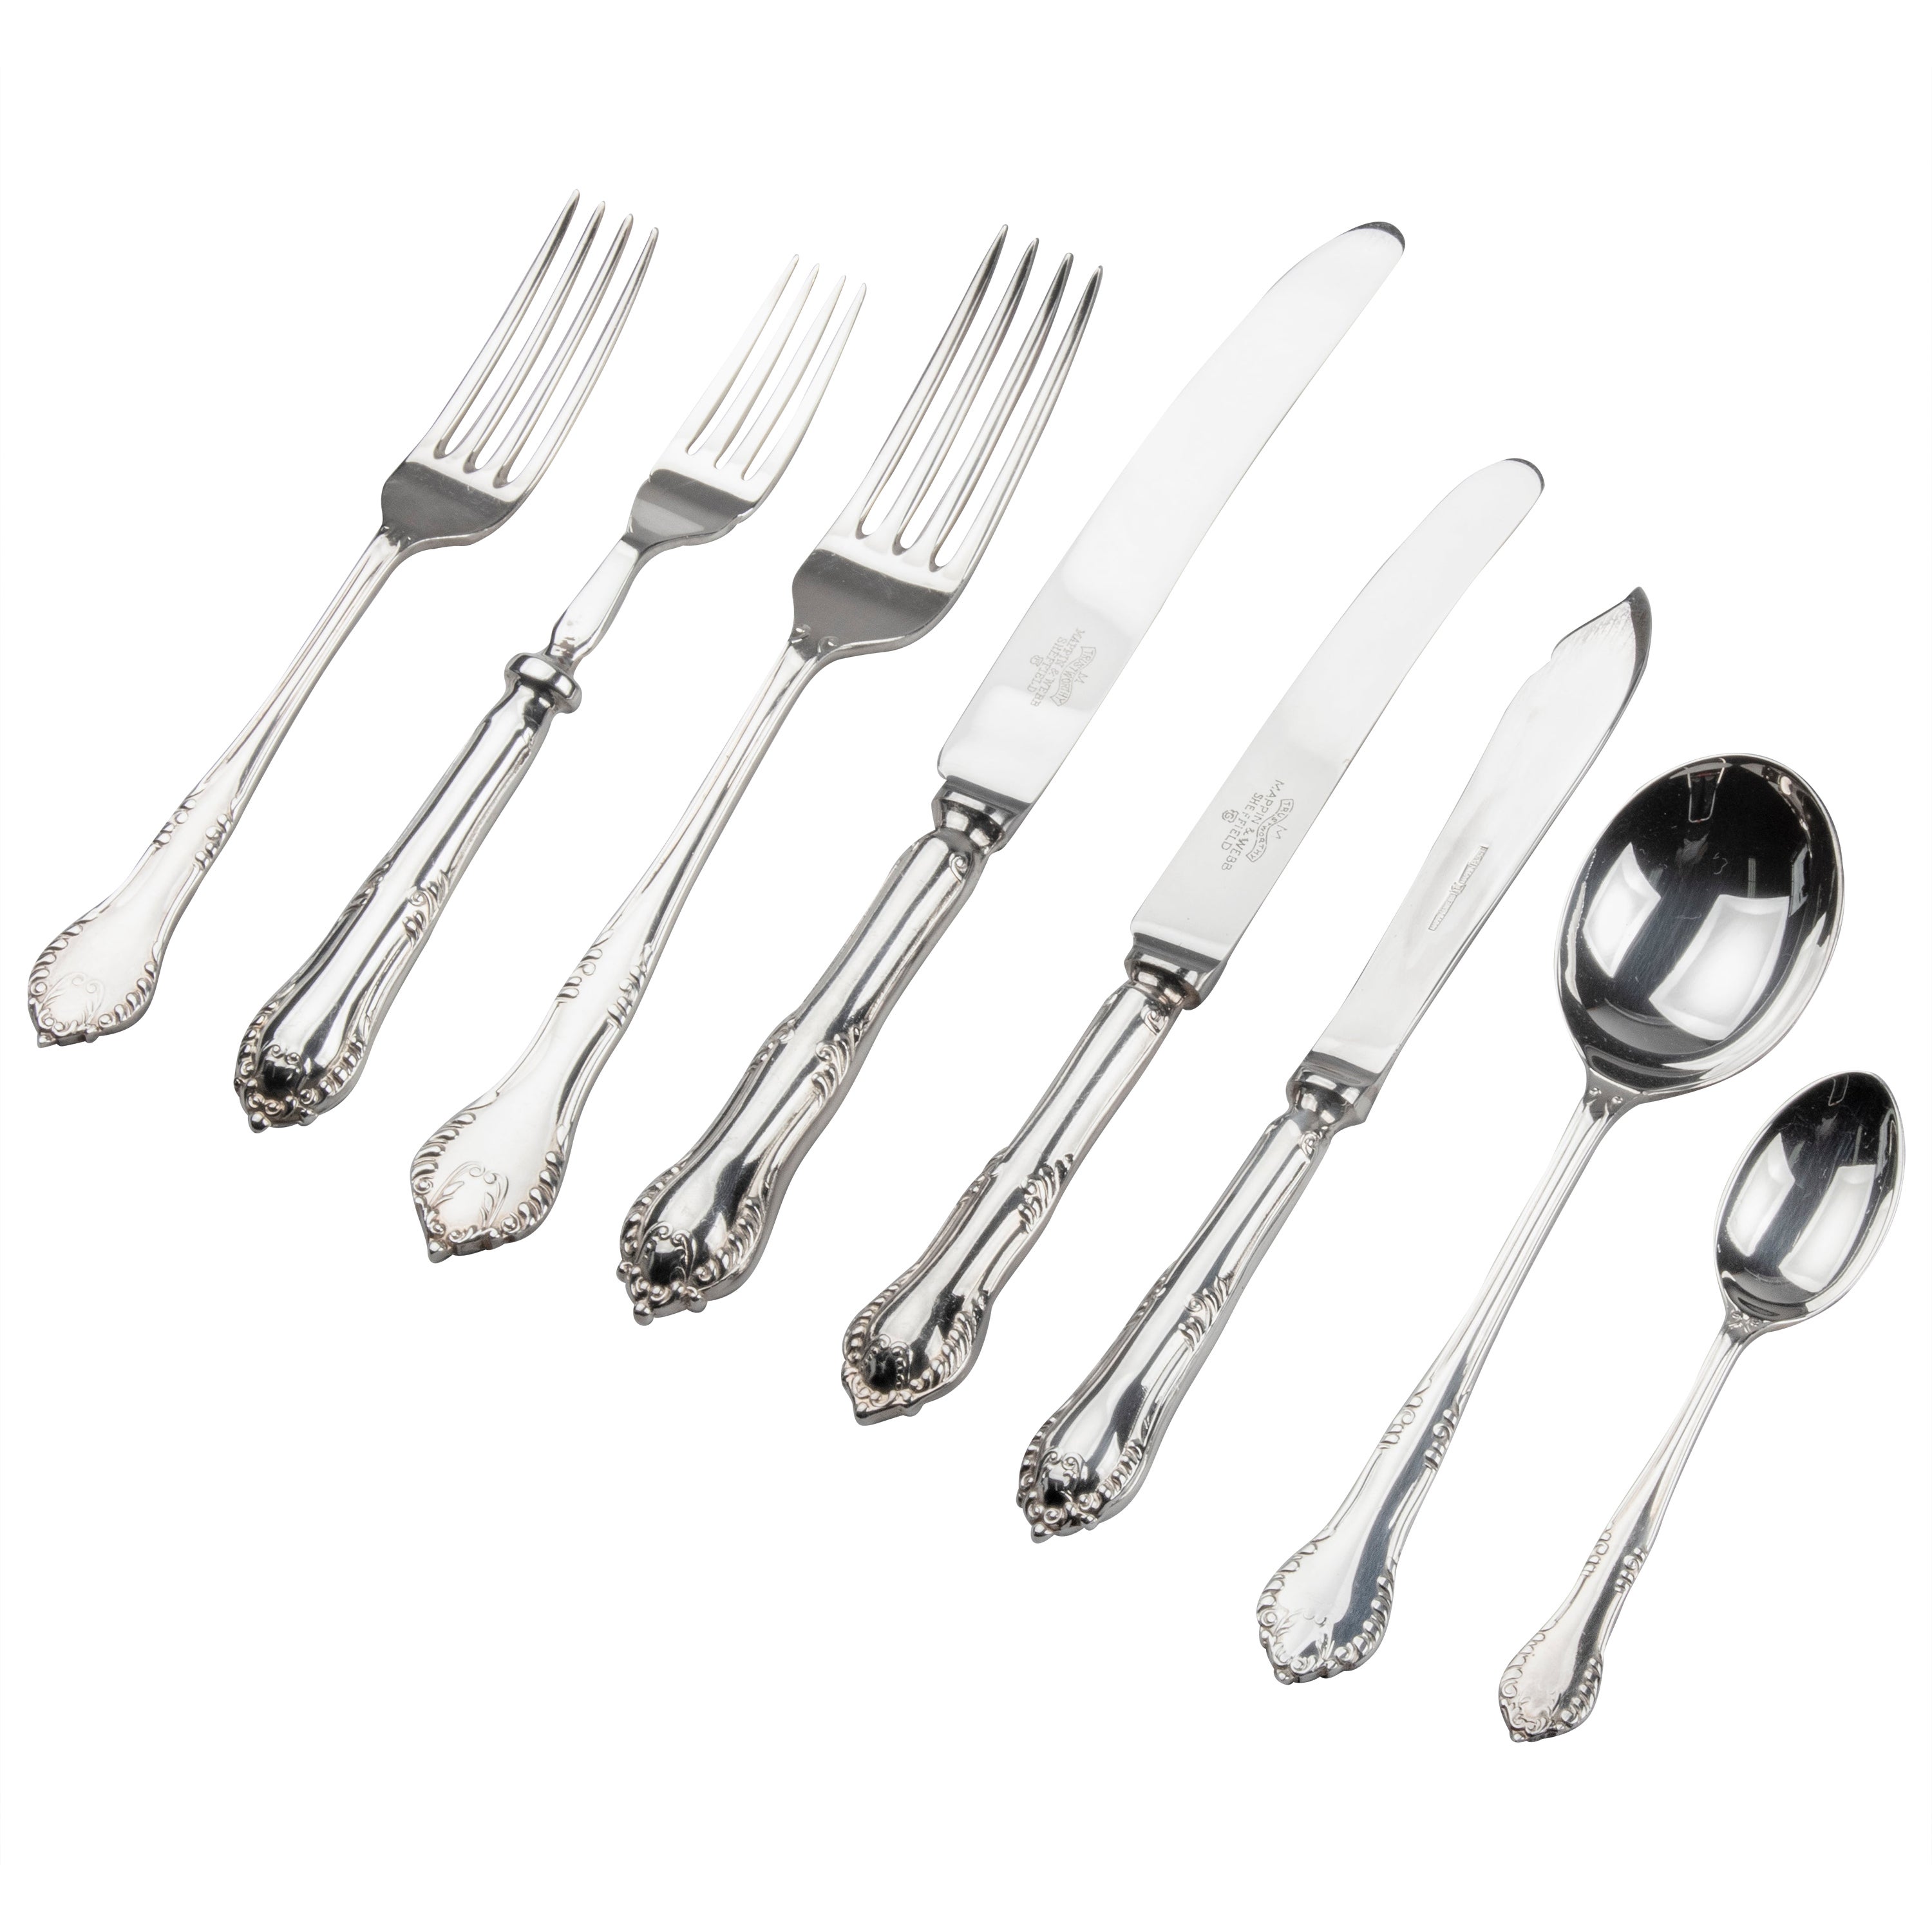 79-Piece Set of Silver Plated Flatware for 8 Persons by Mappin & Webb